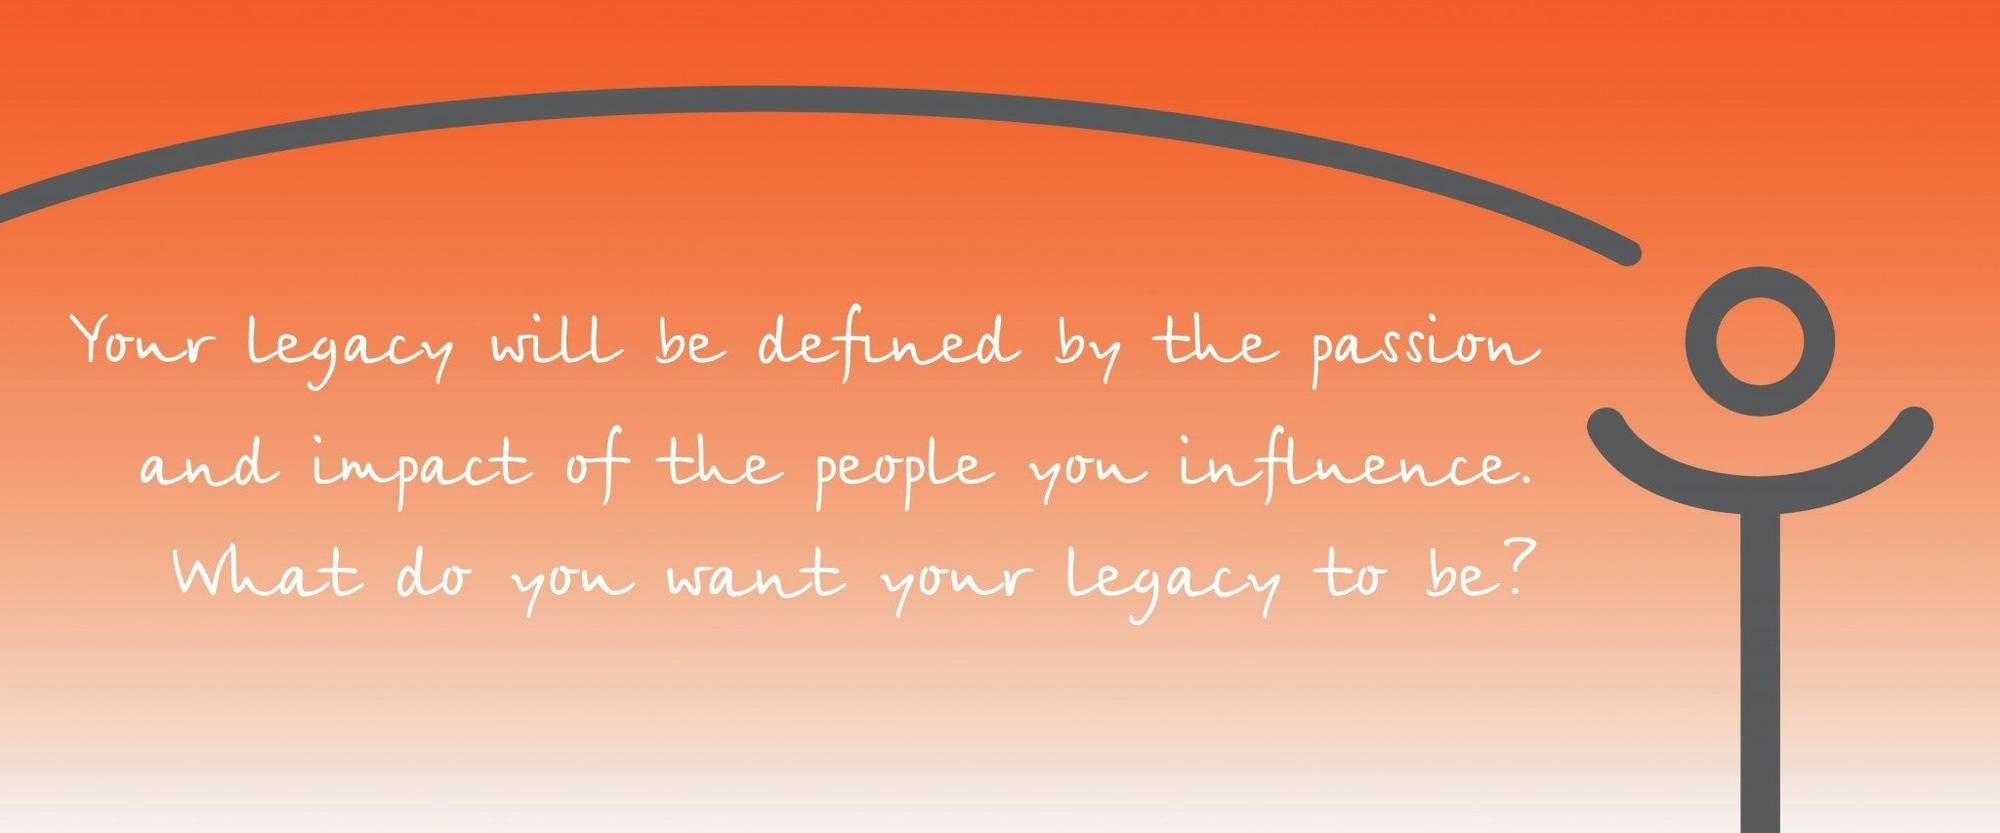 how to start a resume define your legacy for your business resume intelivate leadership legacy poster "Your legacy will be defined by the passion and impact of the people you influence. What do you want your legacy to be?"